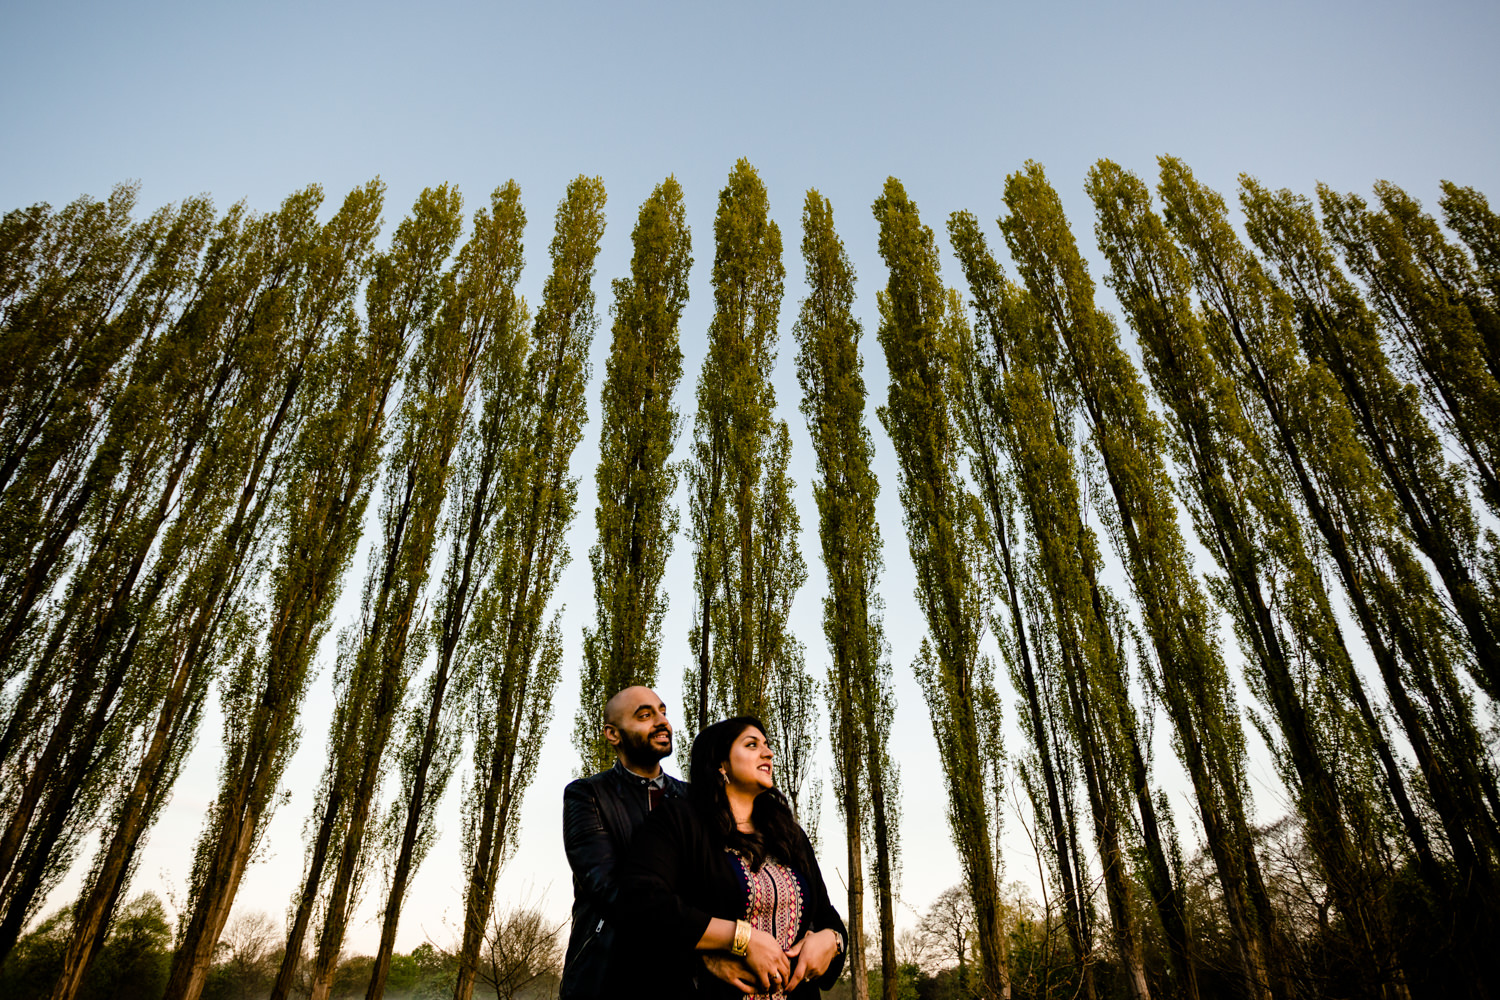 Hugging couple in front of a row of tall trees on their engagement shoot in a Manchester park.